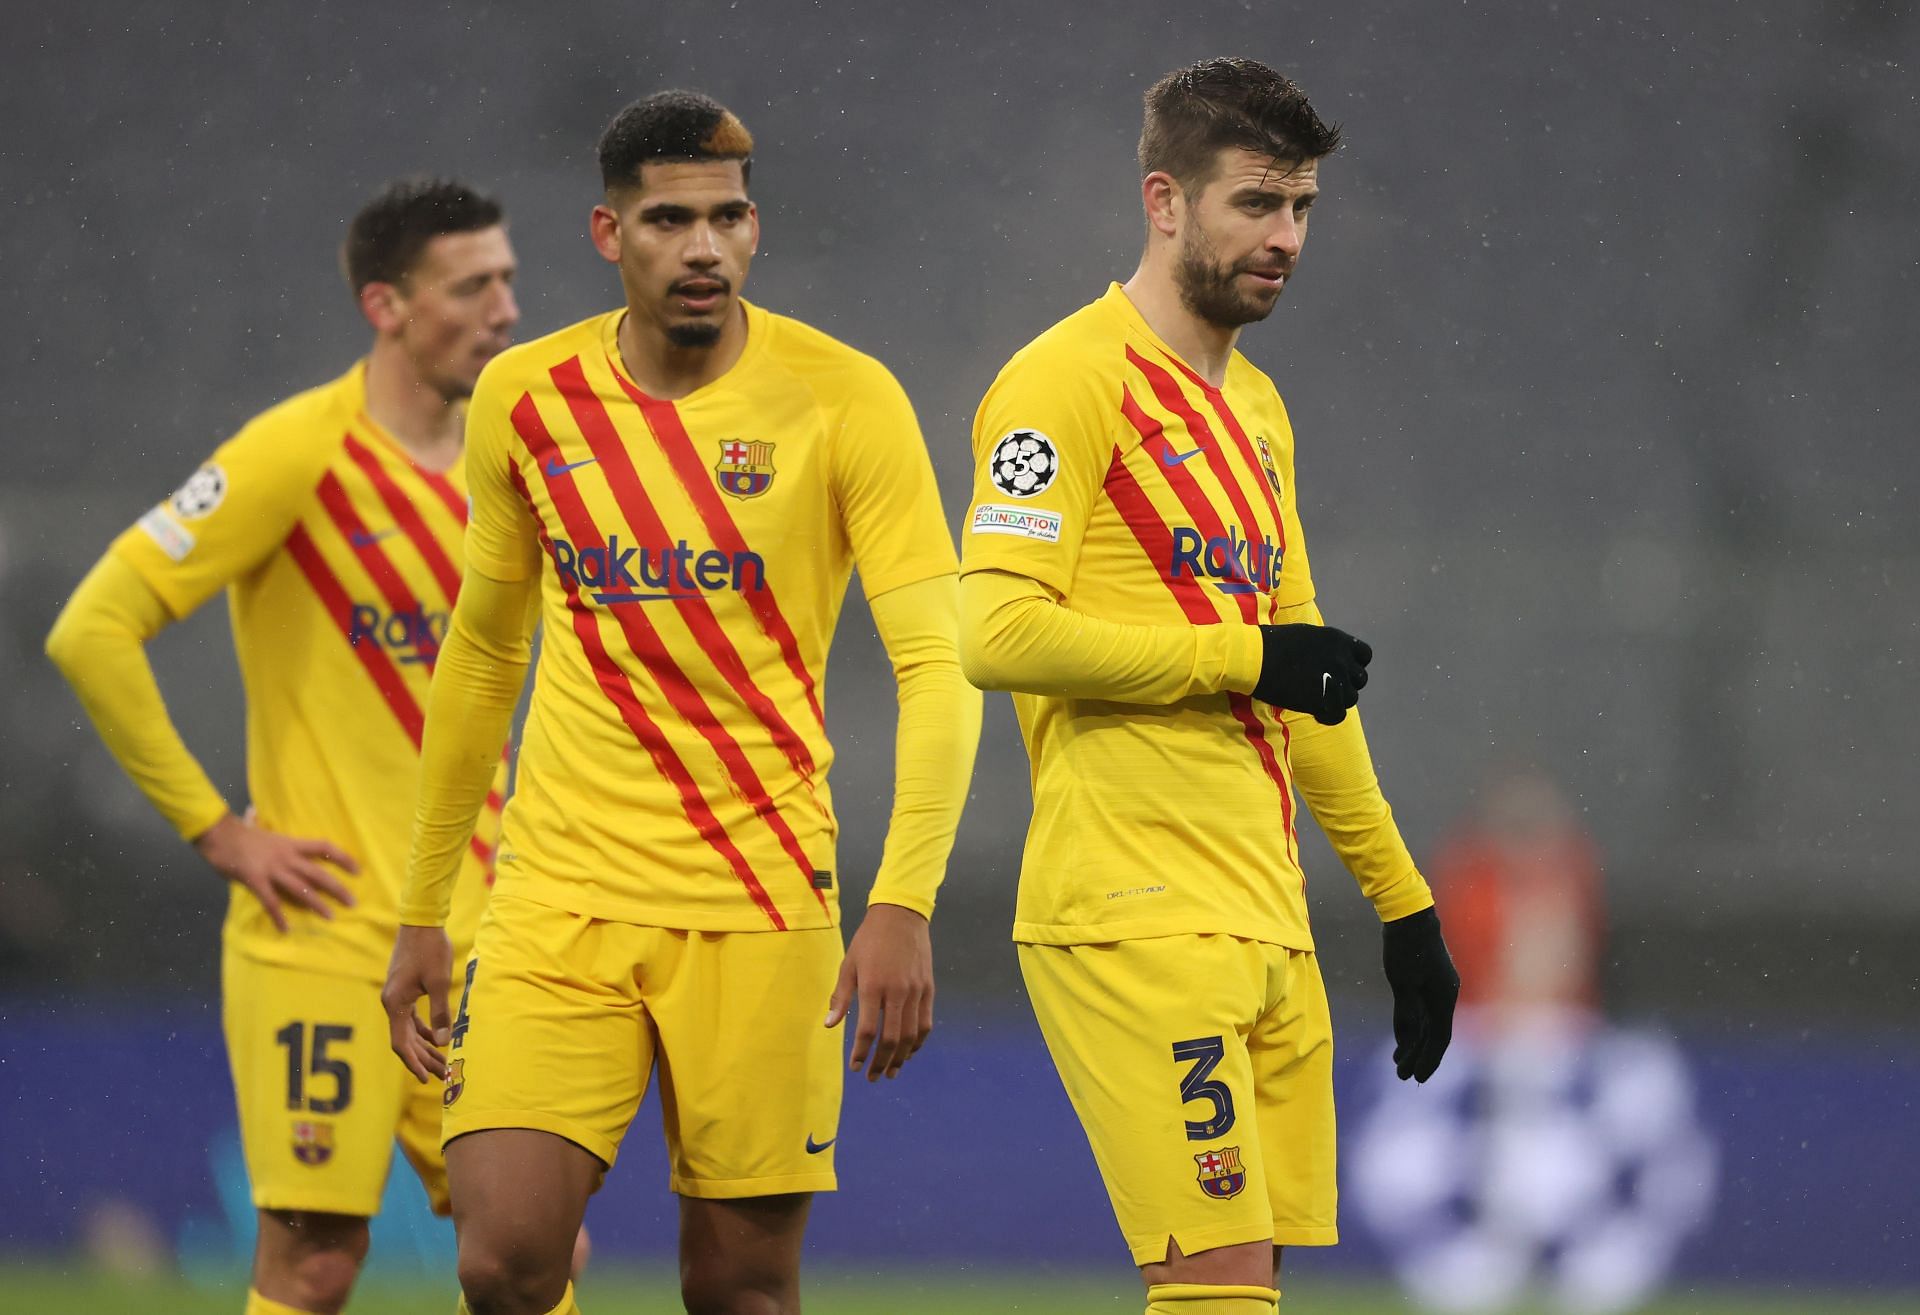 Barcelona have been relegated to the Europa League after crashing out of the Champions League